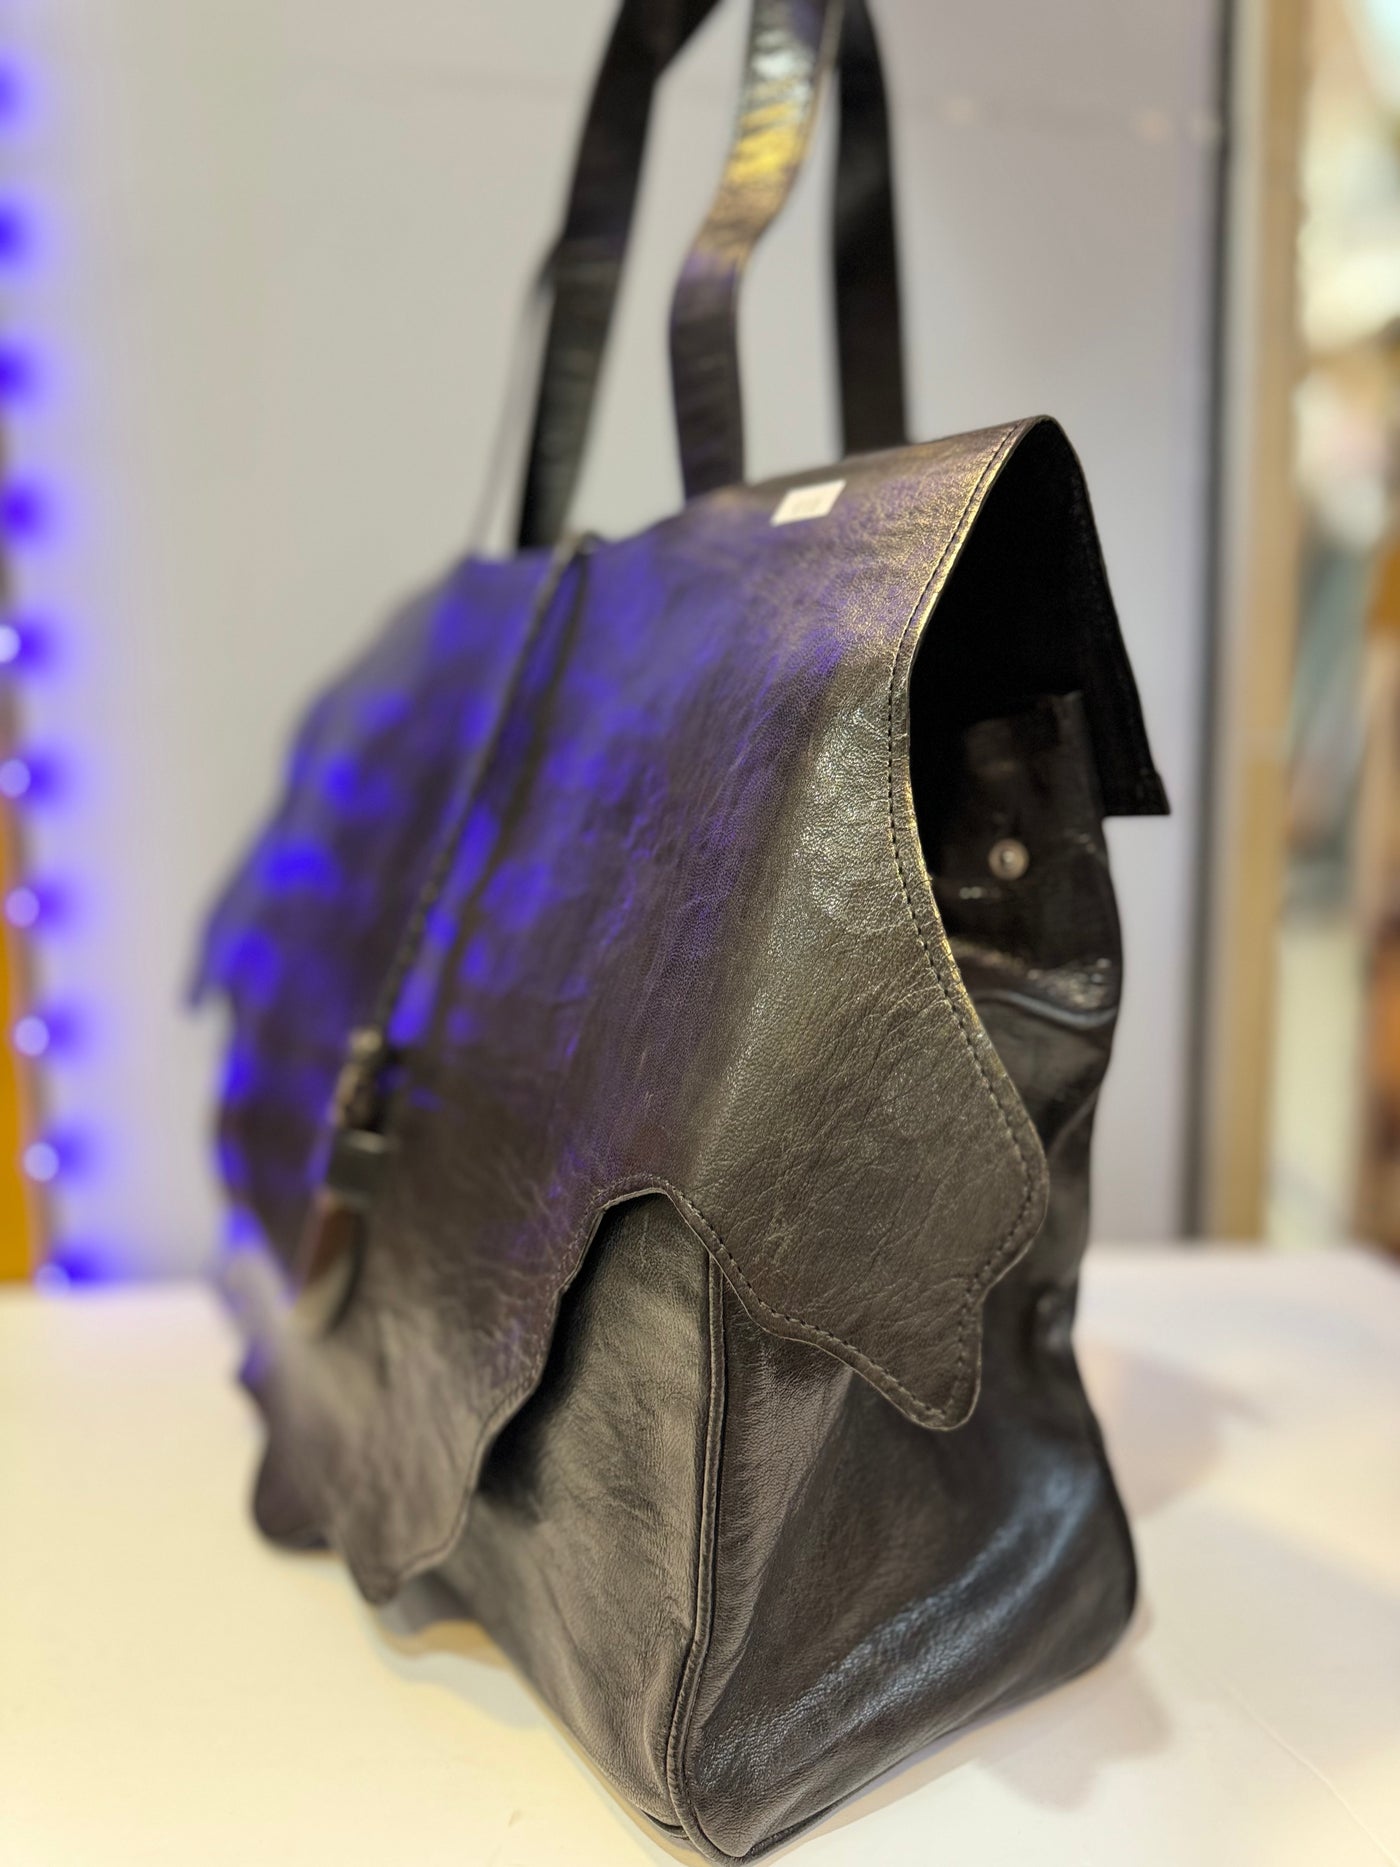 Artisanal Splendor: Handcrafted Real Leather Bag from Mali